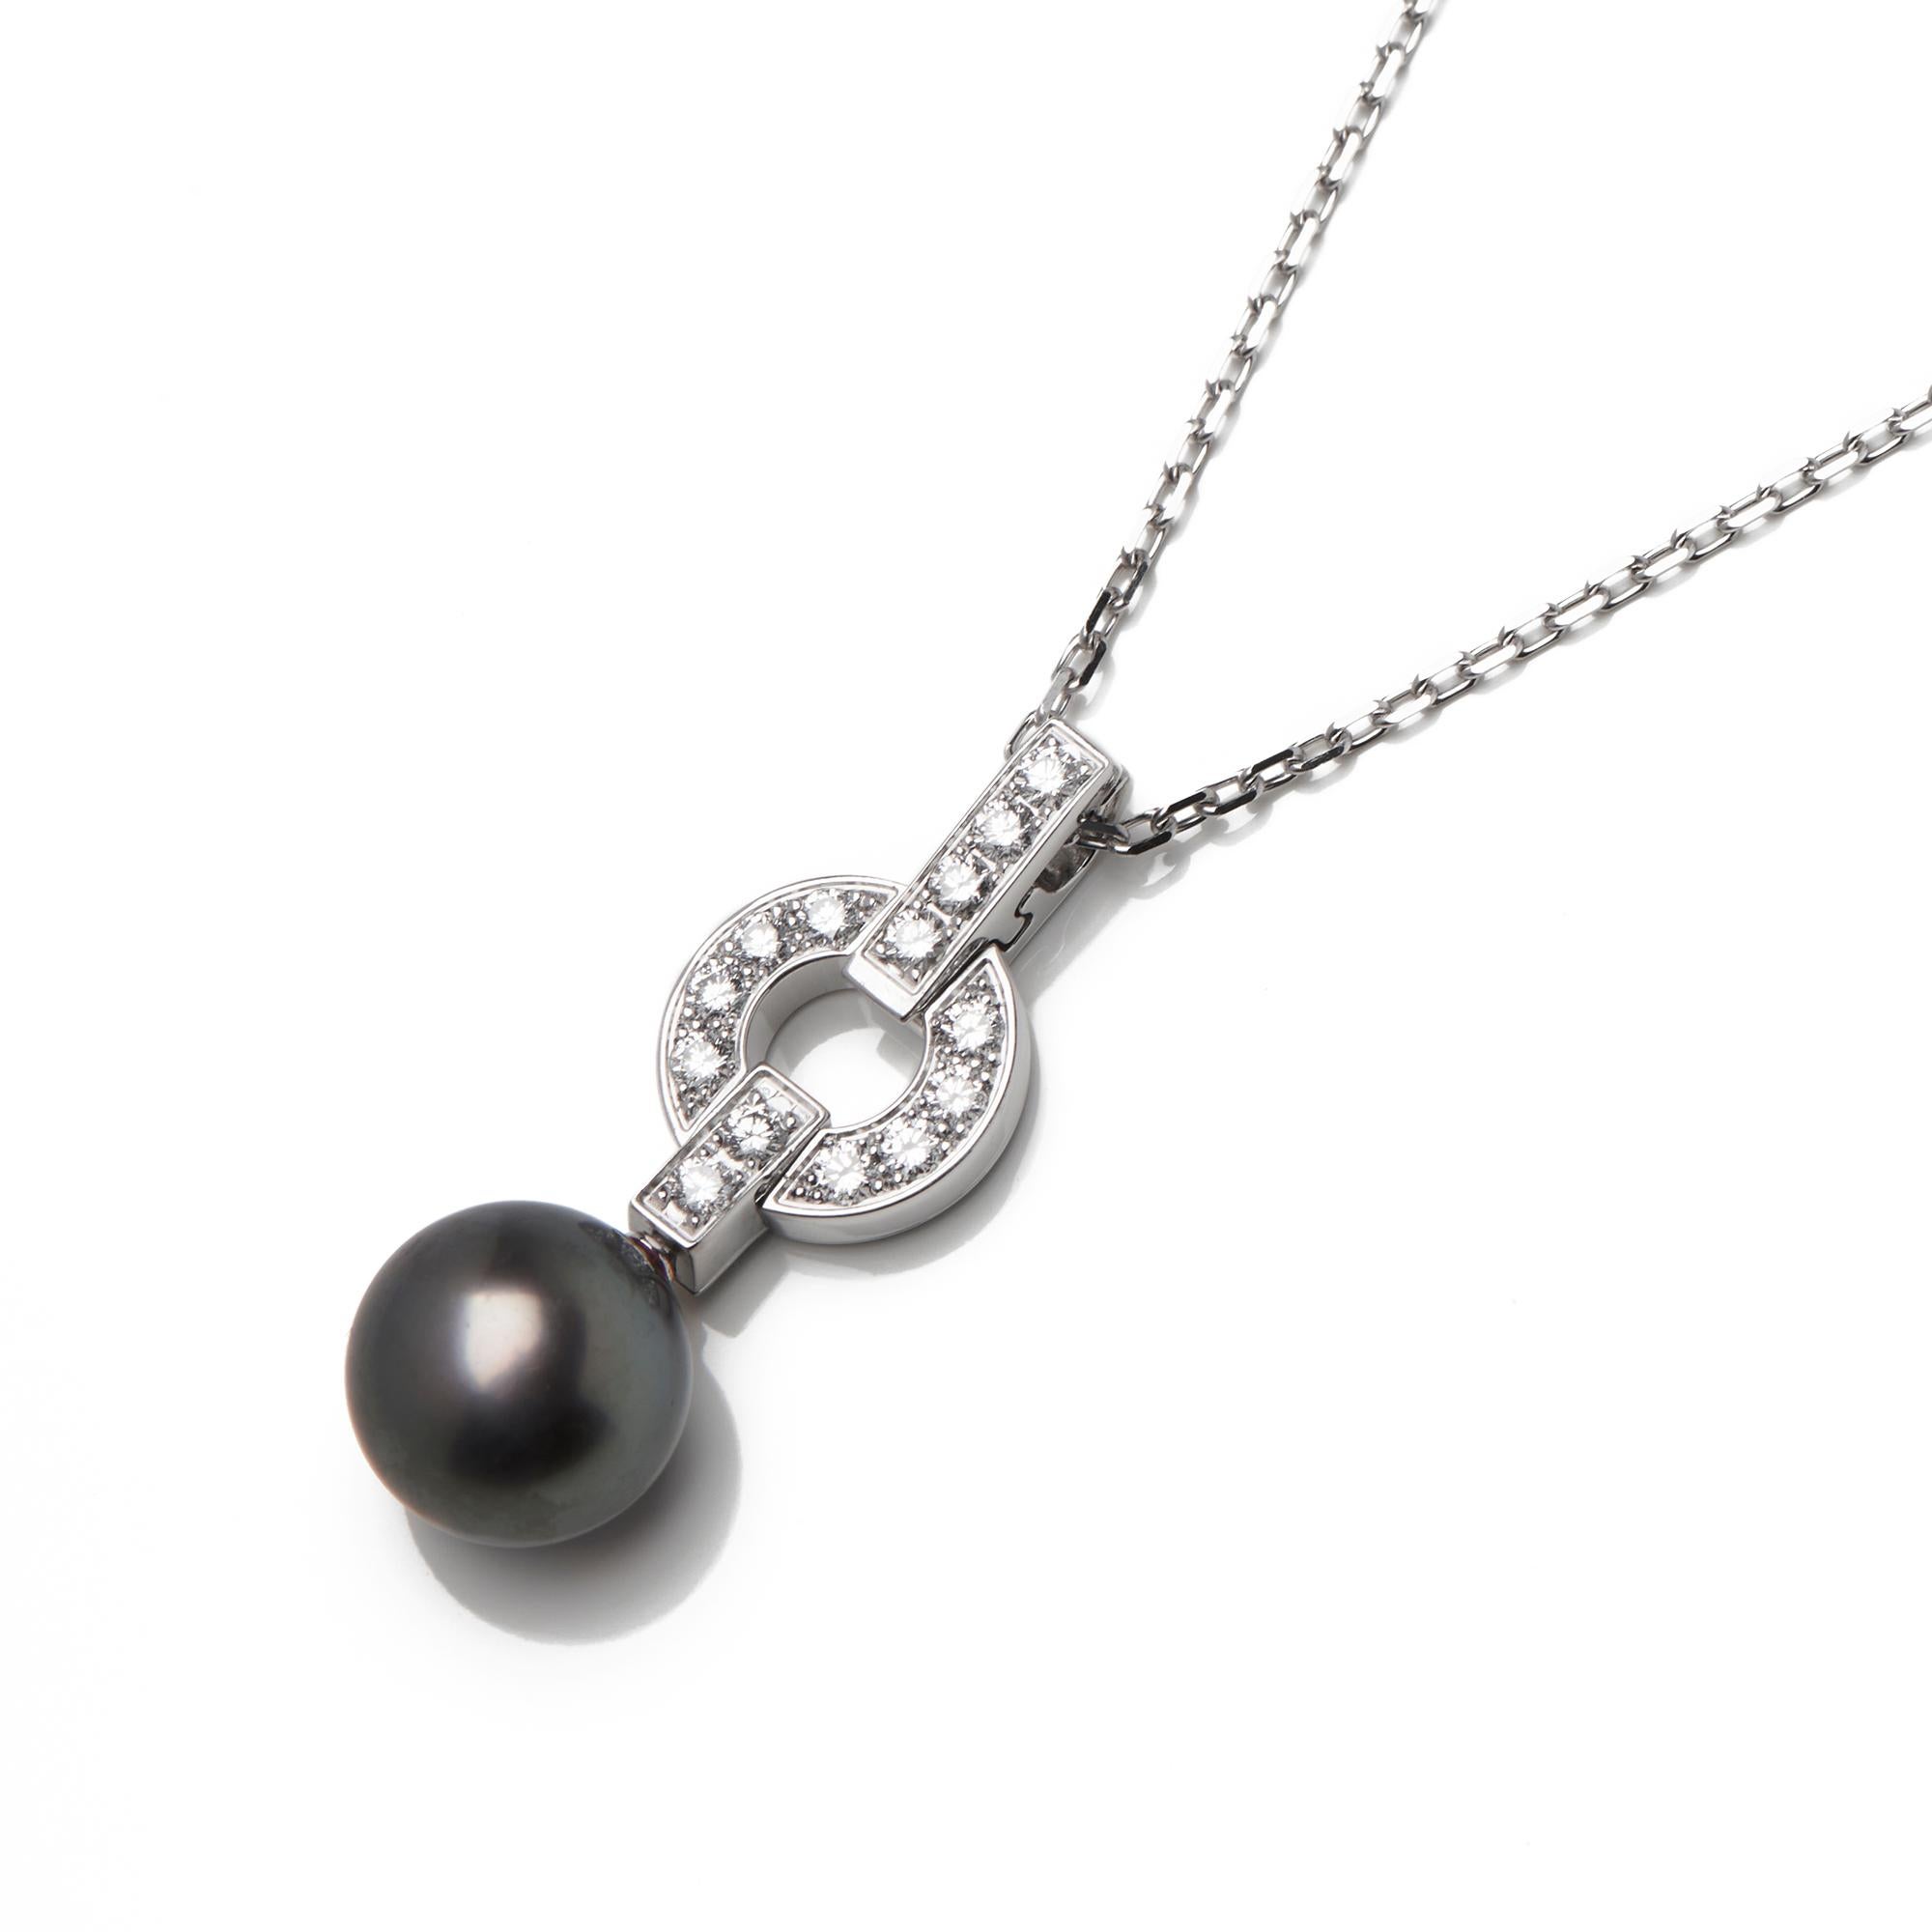 This pendant from Cartier's Himalia collection features 14 round brilliant cut diamonds totalling 0.25ct made in 18ct white gold. It also features a single round Tahitian pearl measuring 9.5mm. Accompanied with it's Cartier certificate and a Cartier